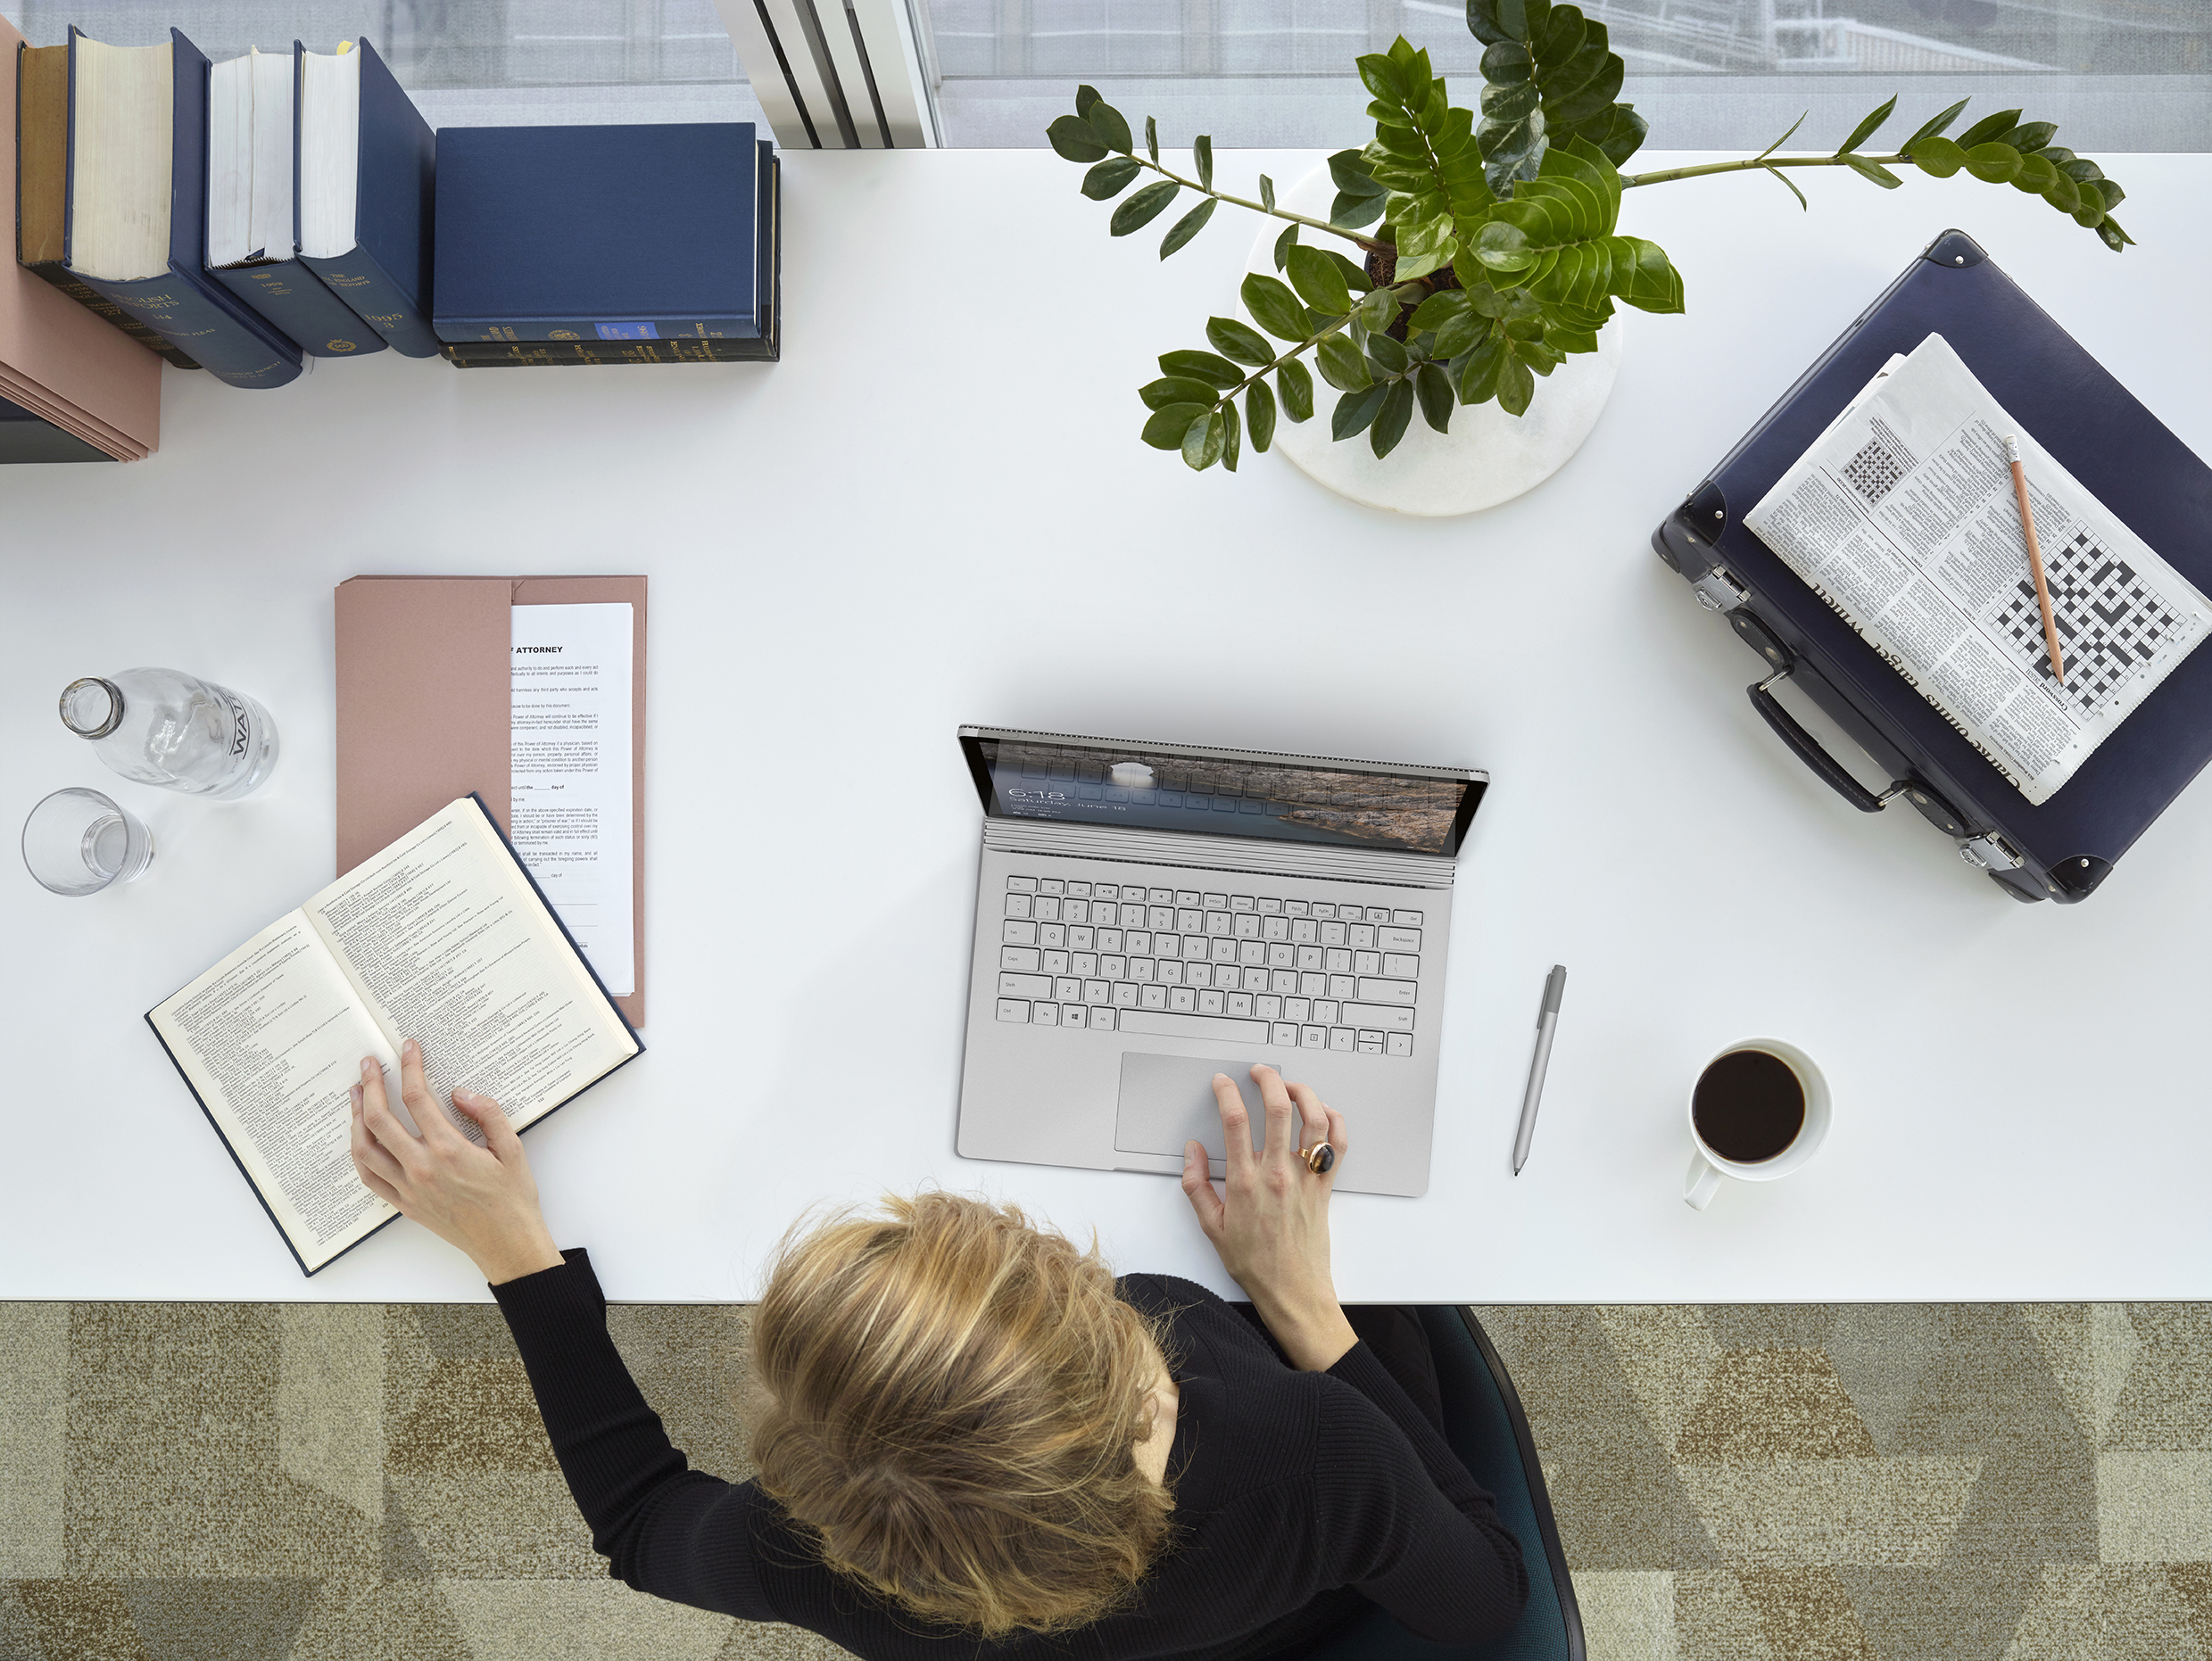 Overhead shot of woman at desk typing on Microsoft Surface device